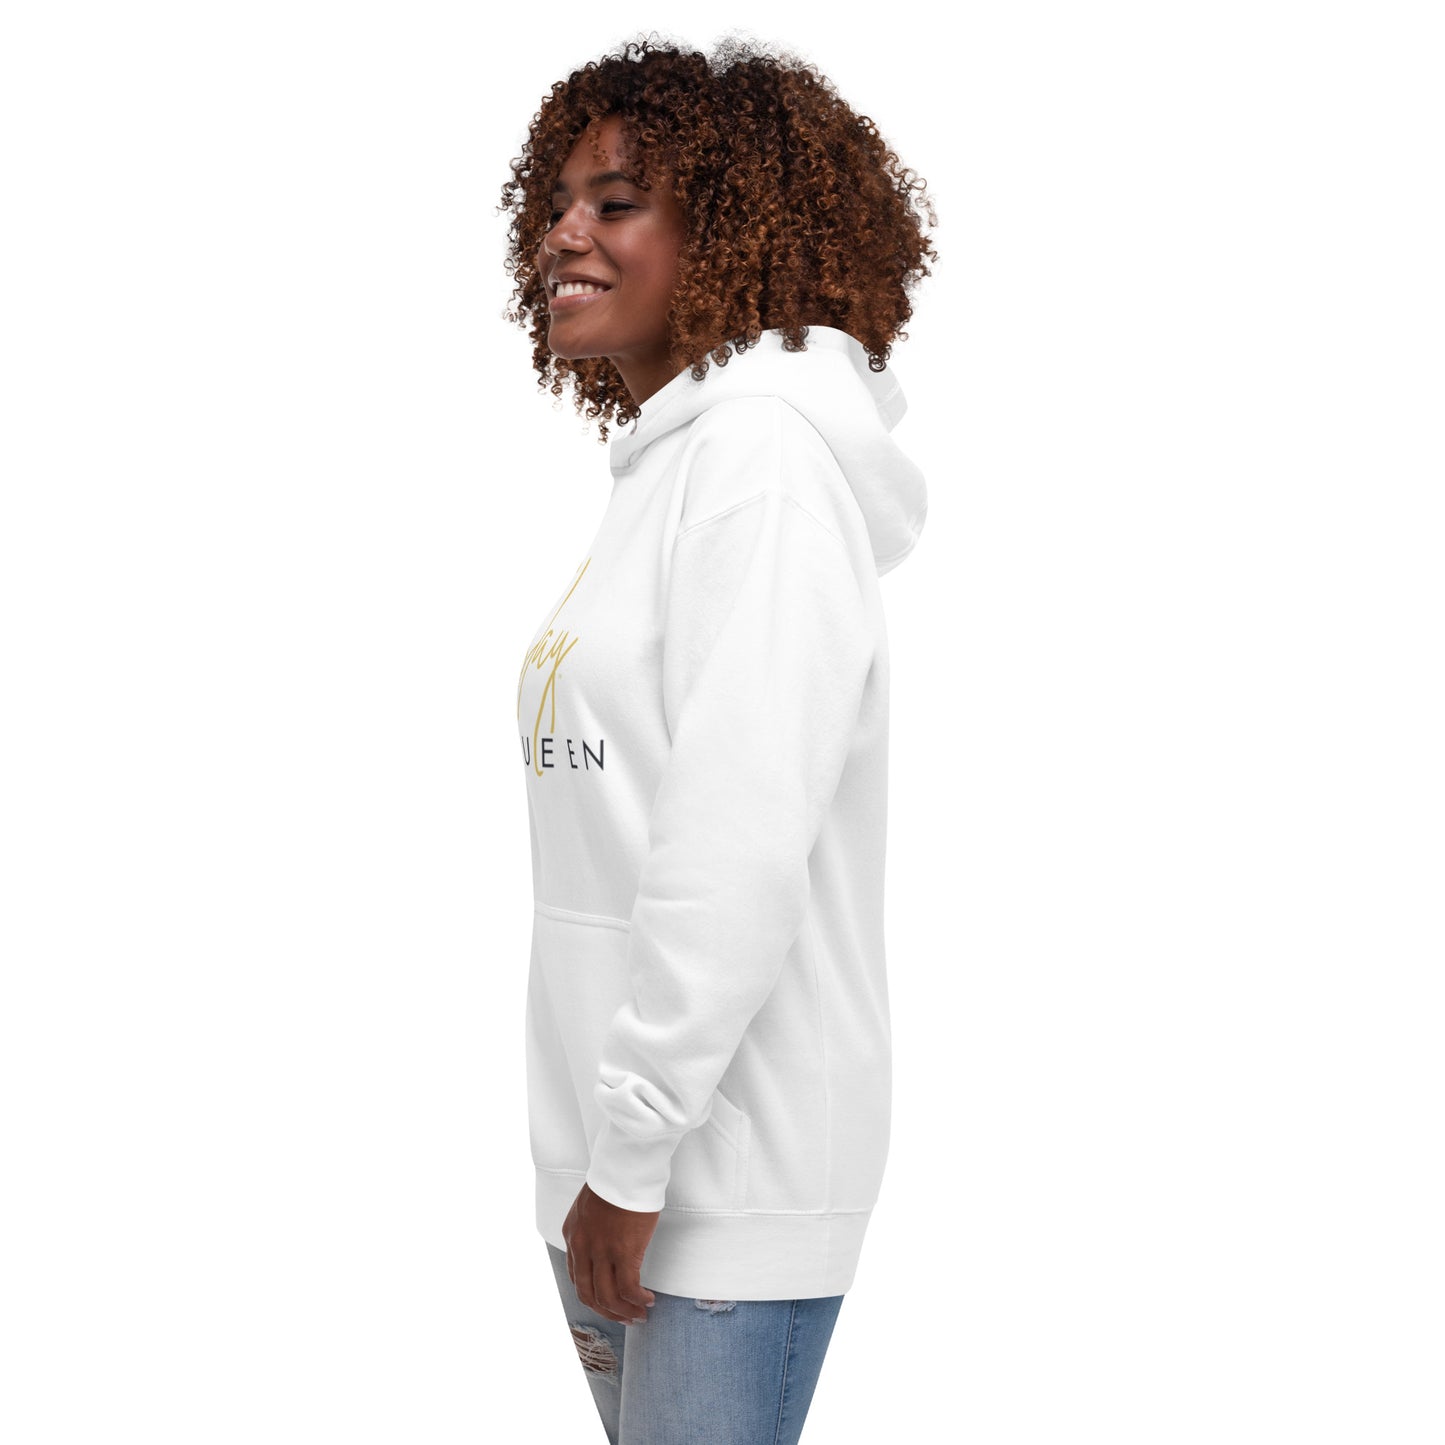 SLAY Queen Hoodie for the POWERFUL QUEENS of SLAYing!